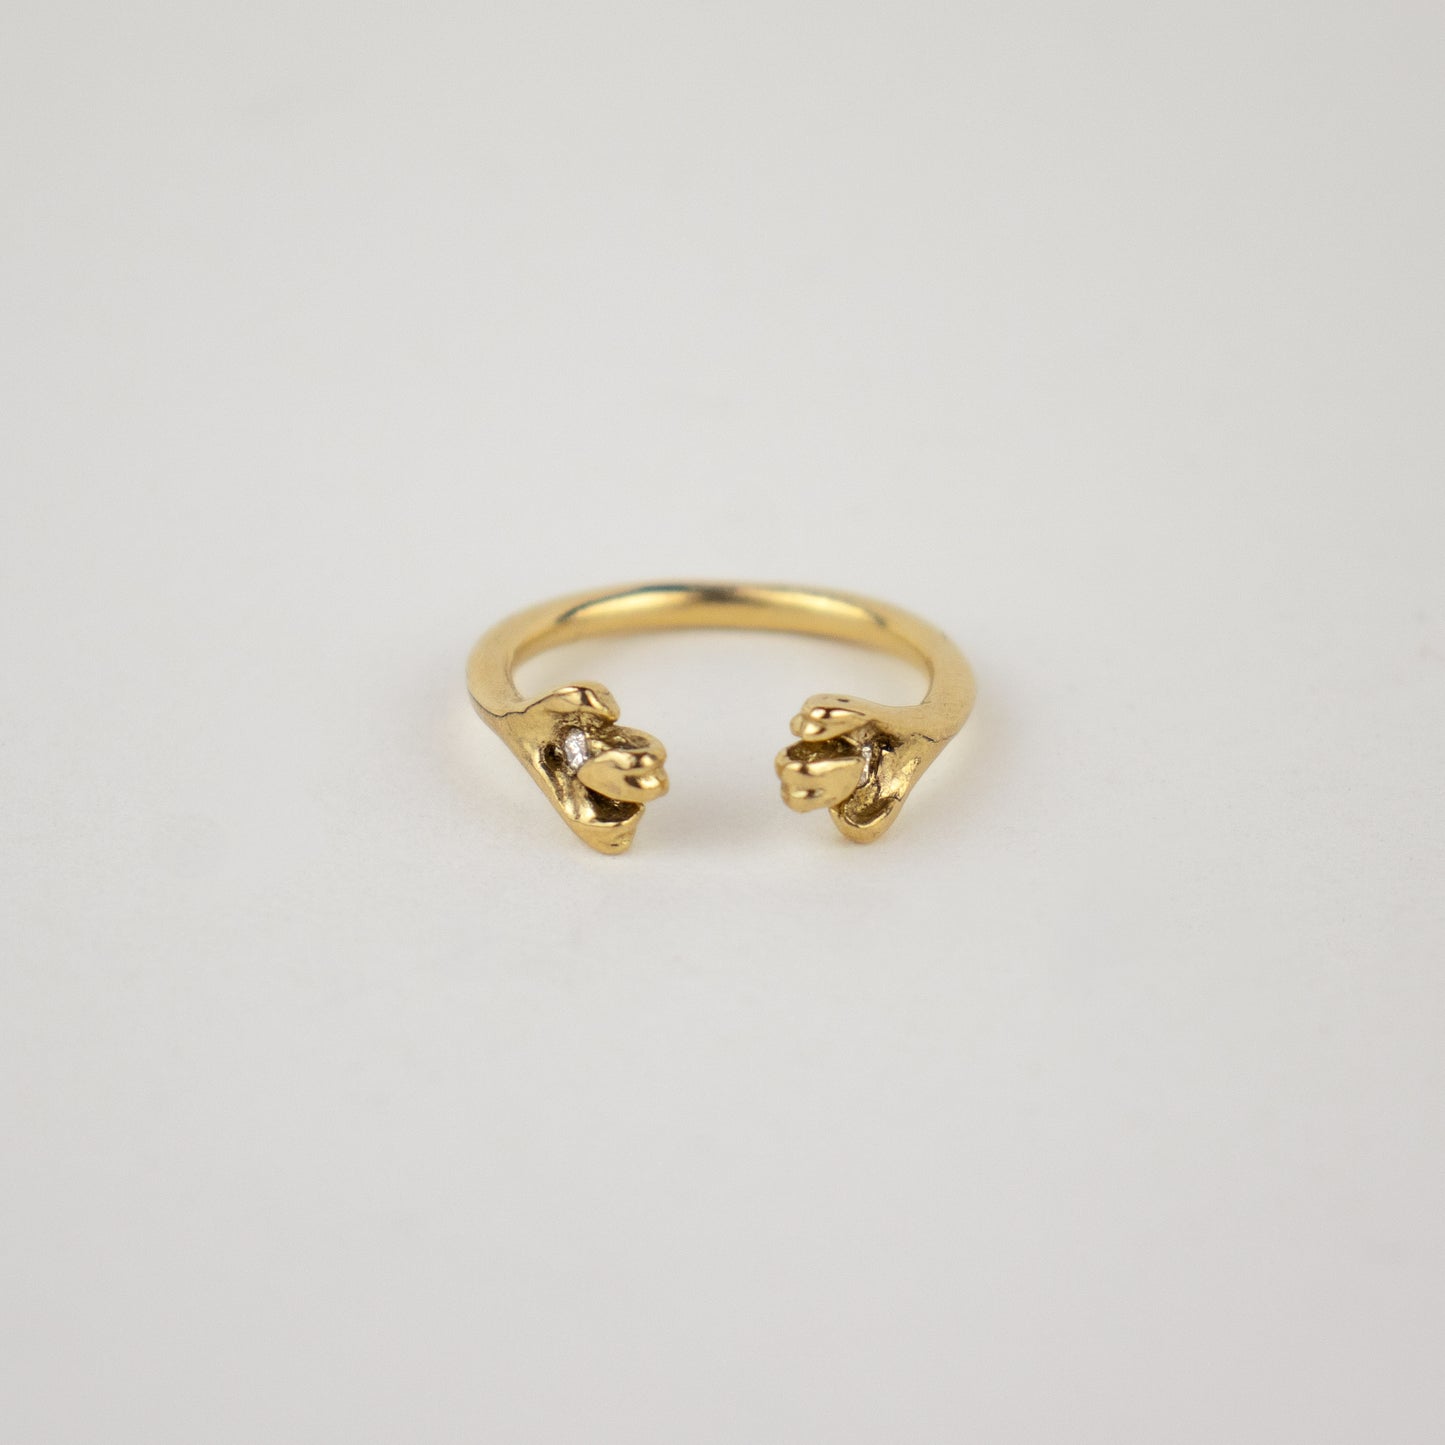 Solid reclaimed 14k gold femur ring set with two 2mm diamonds and adjustable for ring sizes 5 to 6.5 made-to-order and finished in our Catskills store-studio.